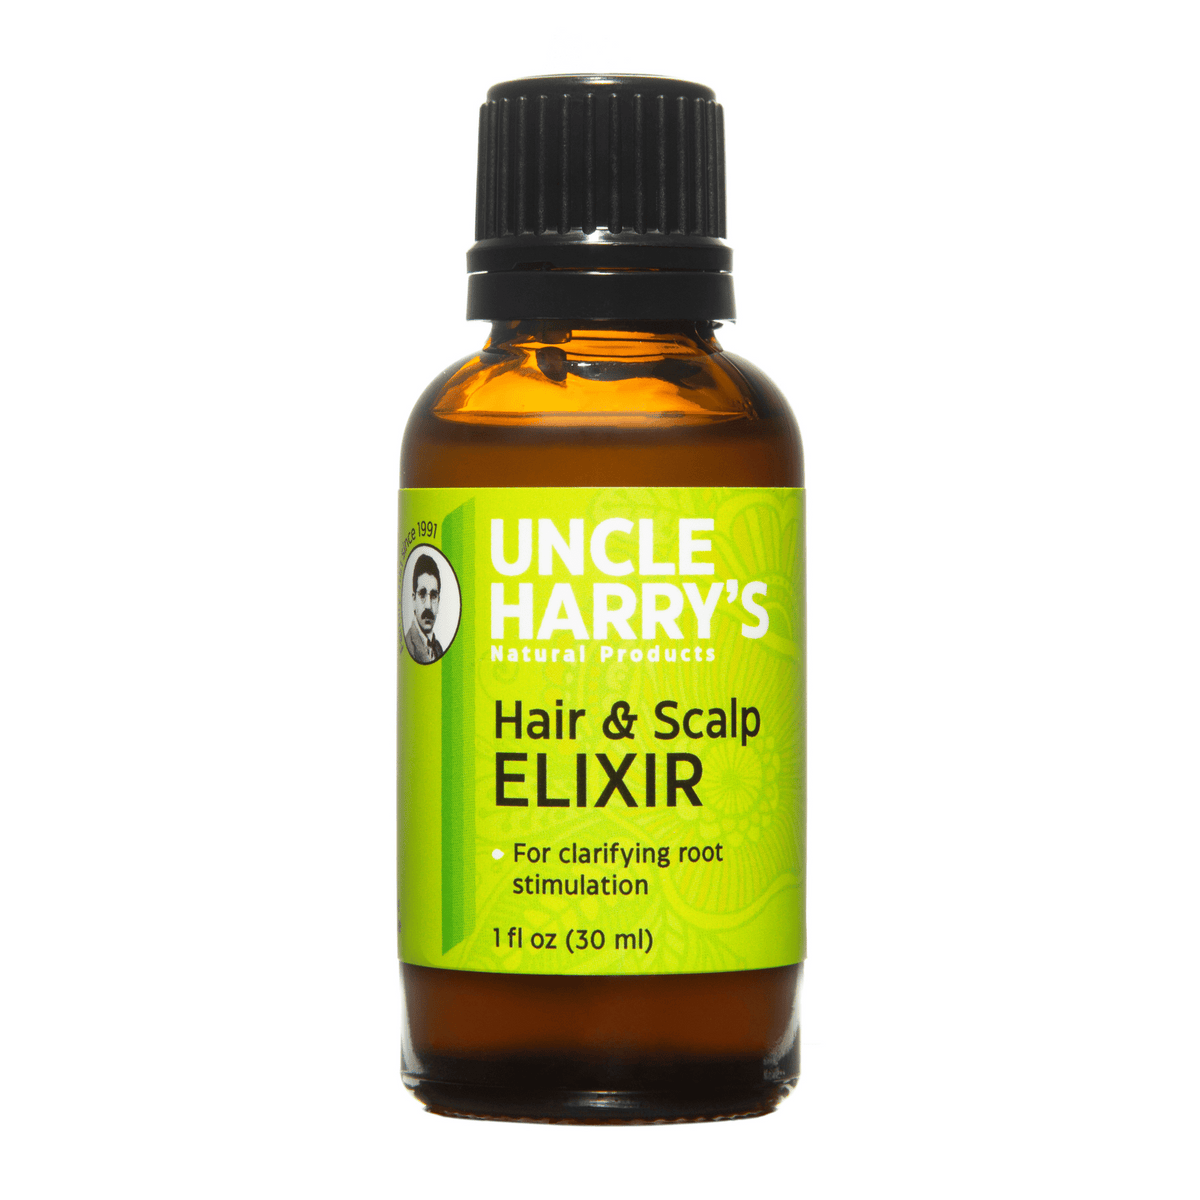 Primary Image of Hair and Scalp Elixir